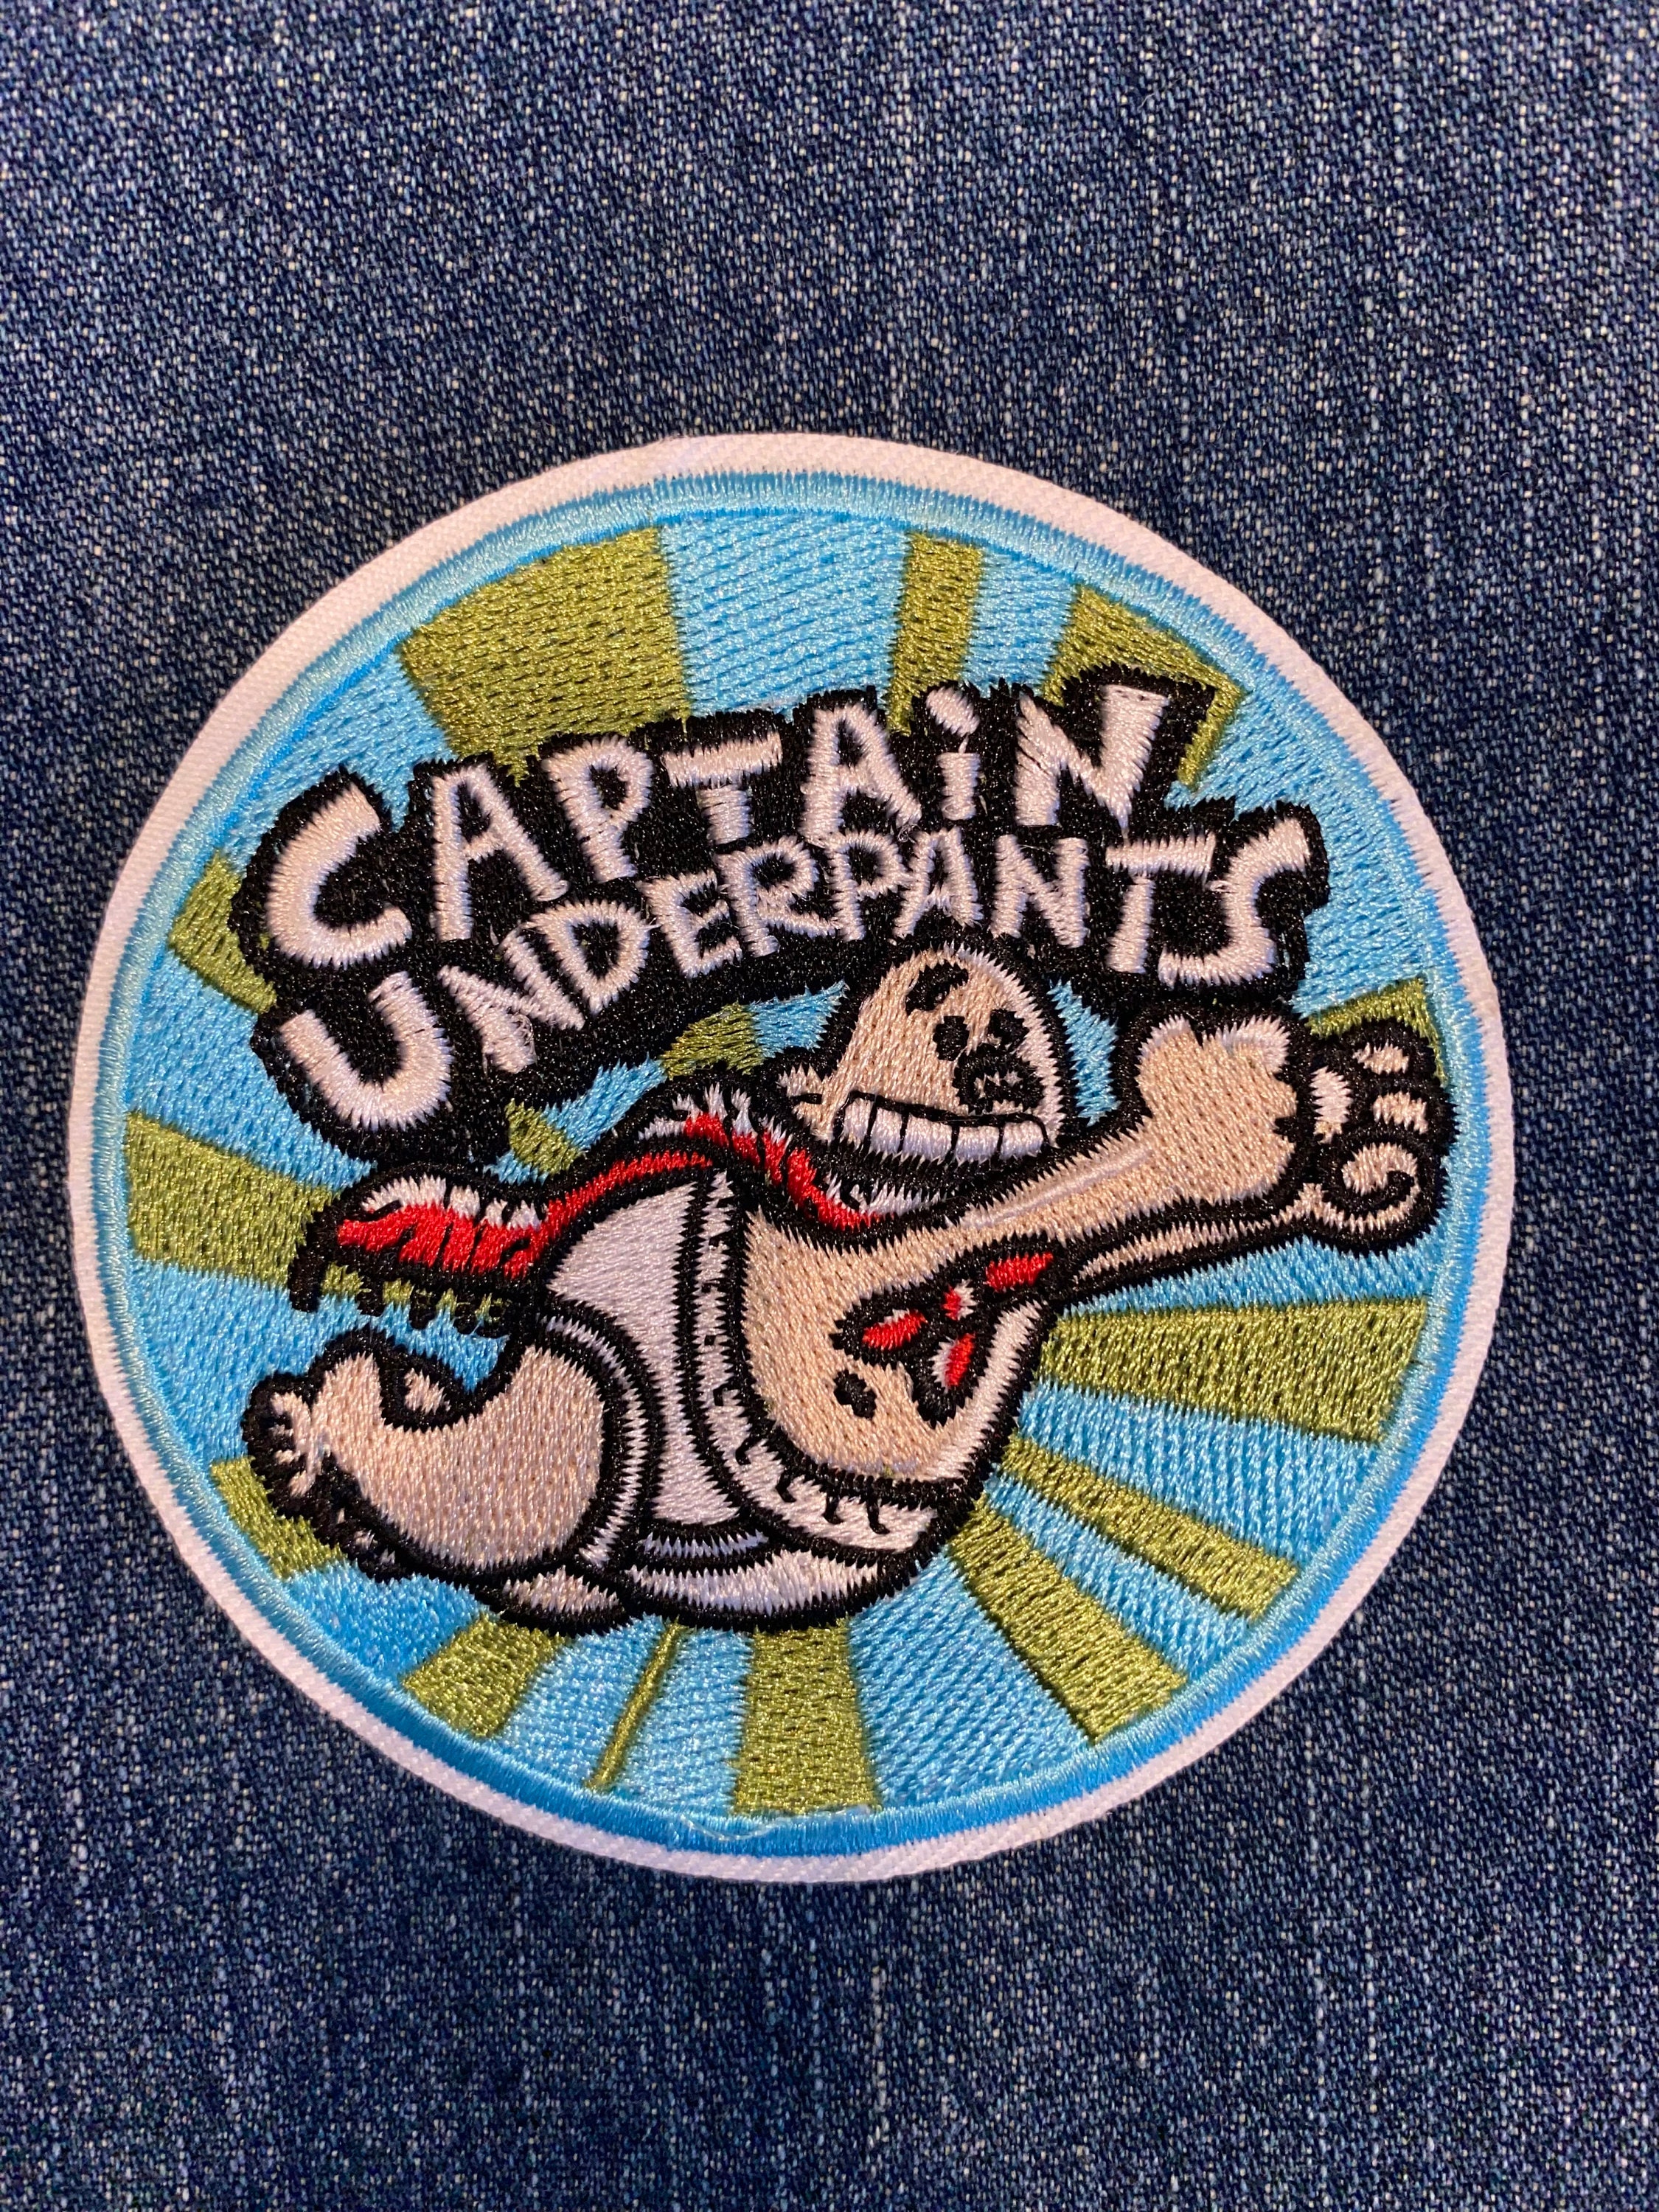 CAPTAIN UNDERPANTS Embroidery Patch Use Customize Your Denim Or Craft DIY  Kids Book